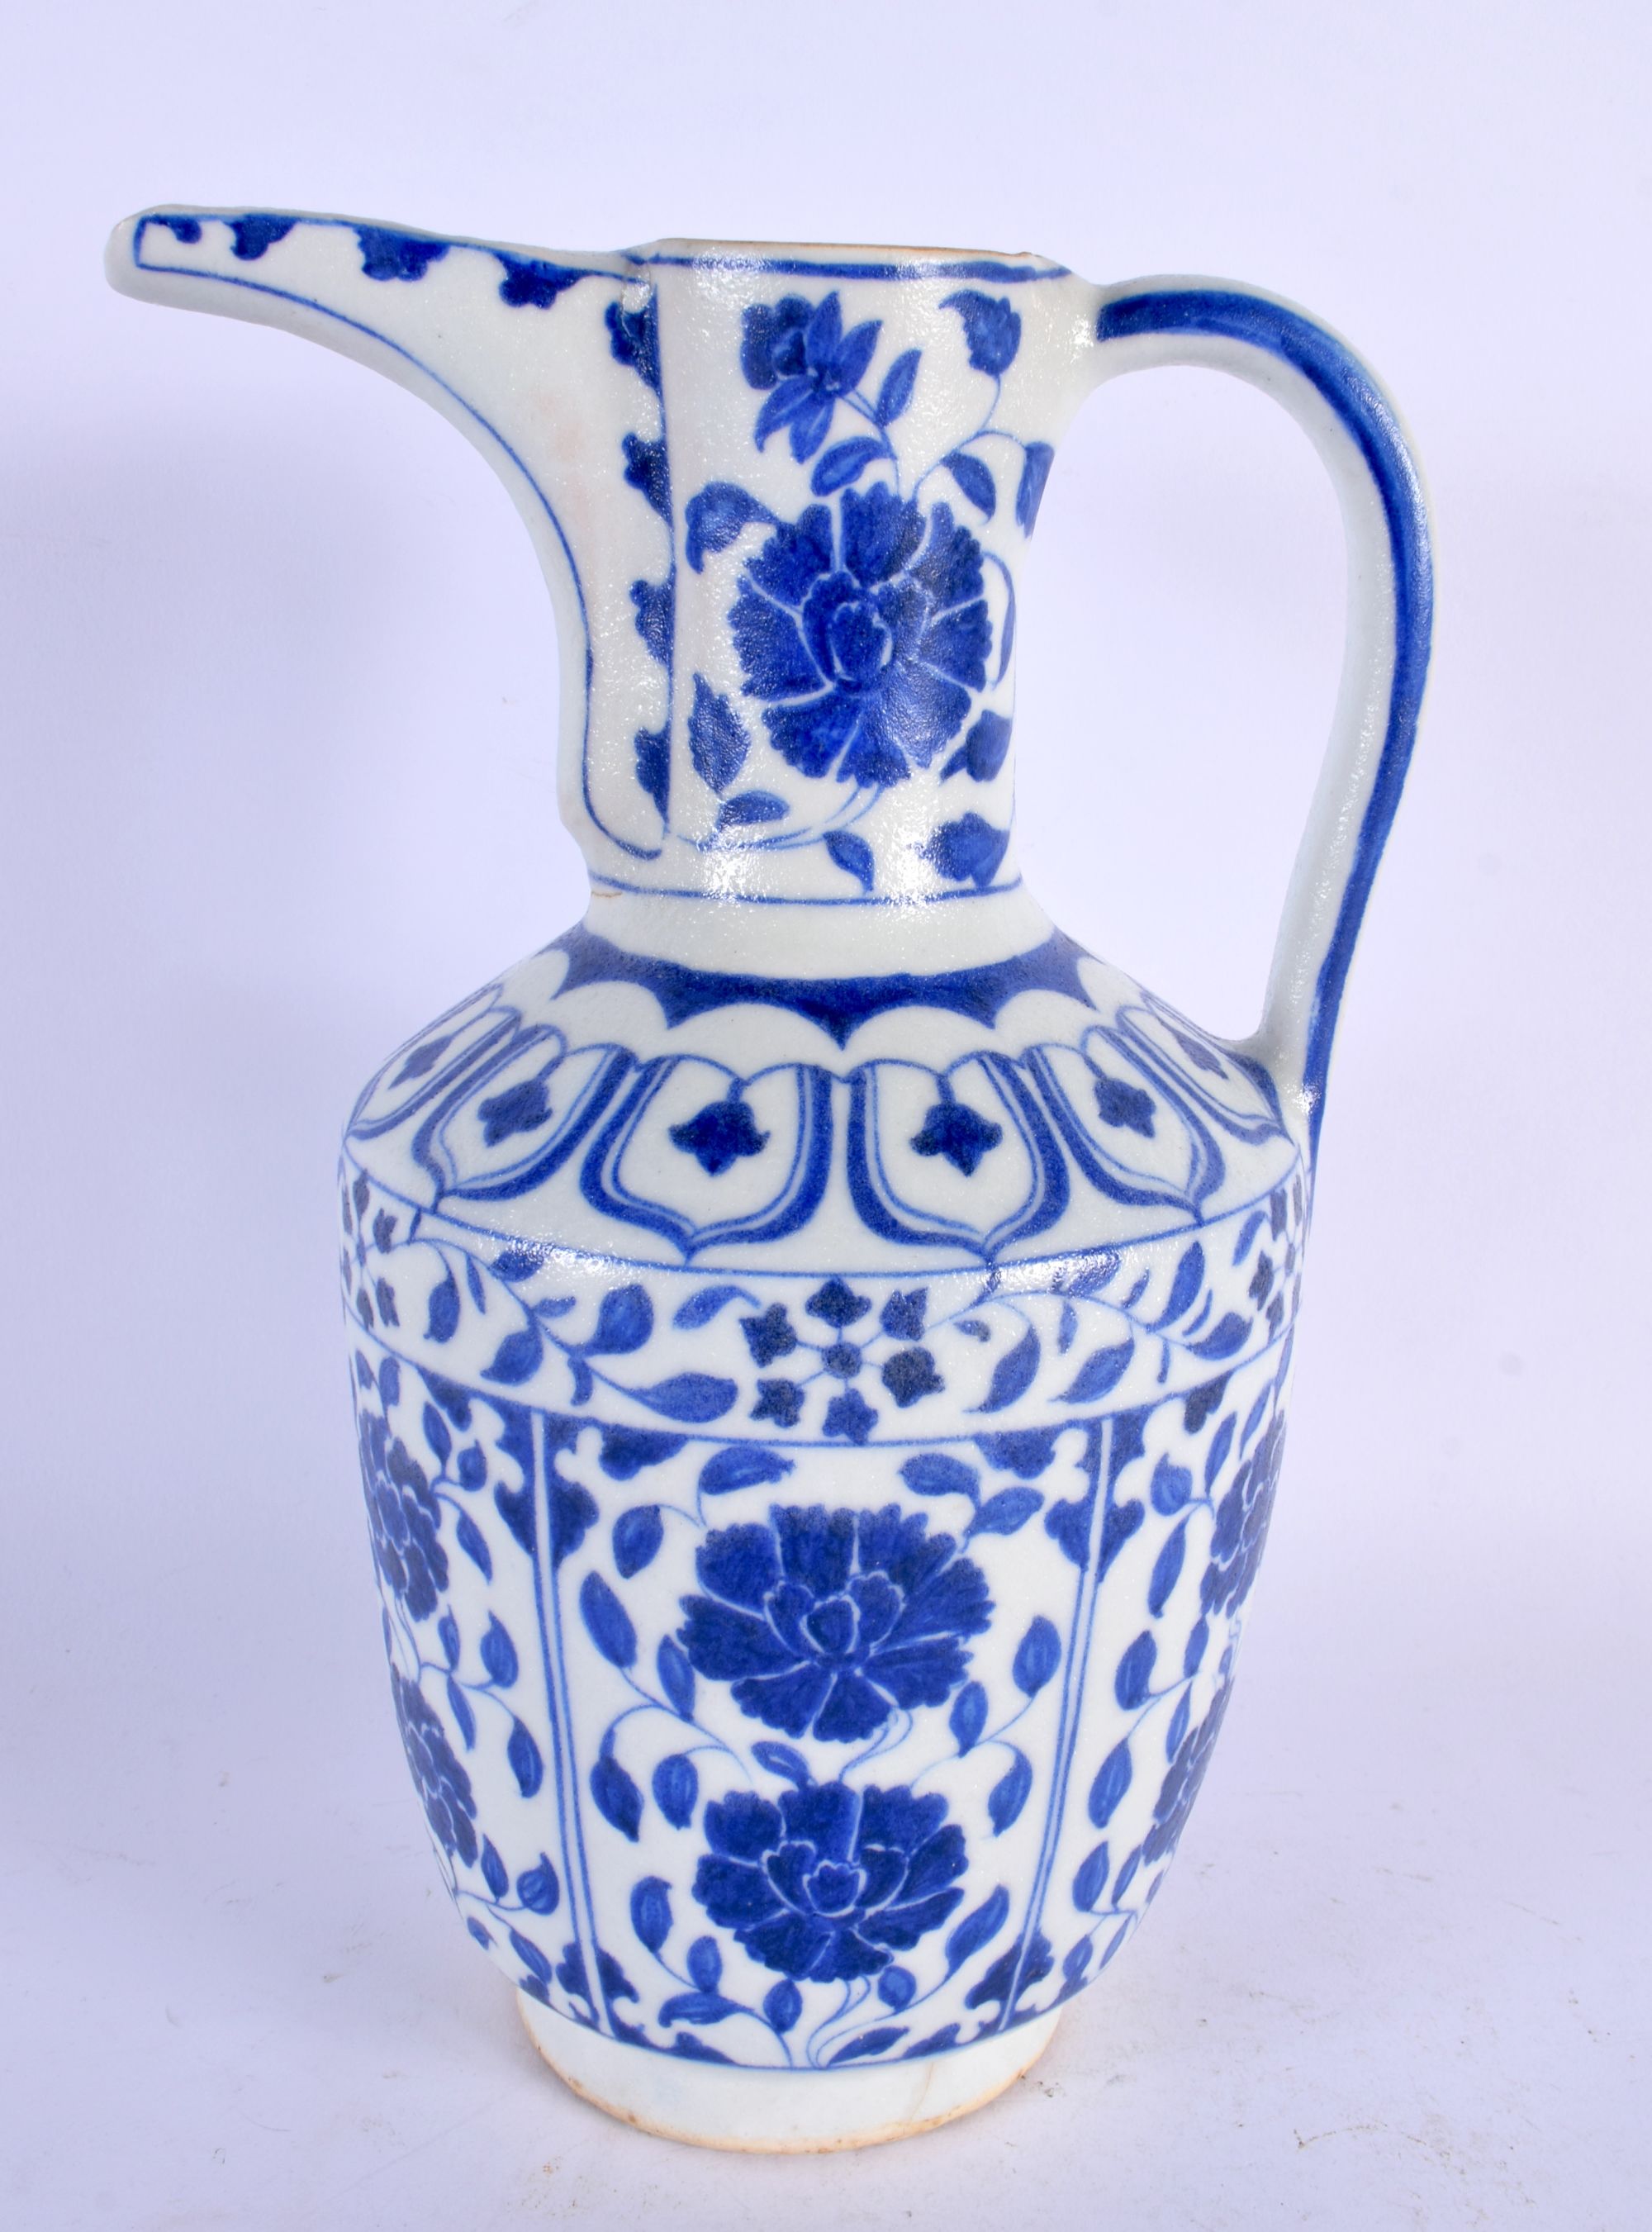 A TURKISH ISLAMIC BLUE AND WHITE WATER JUG. 27 cm high.